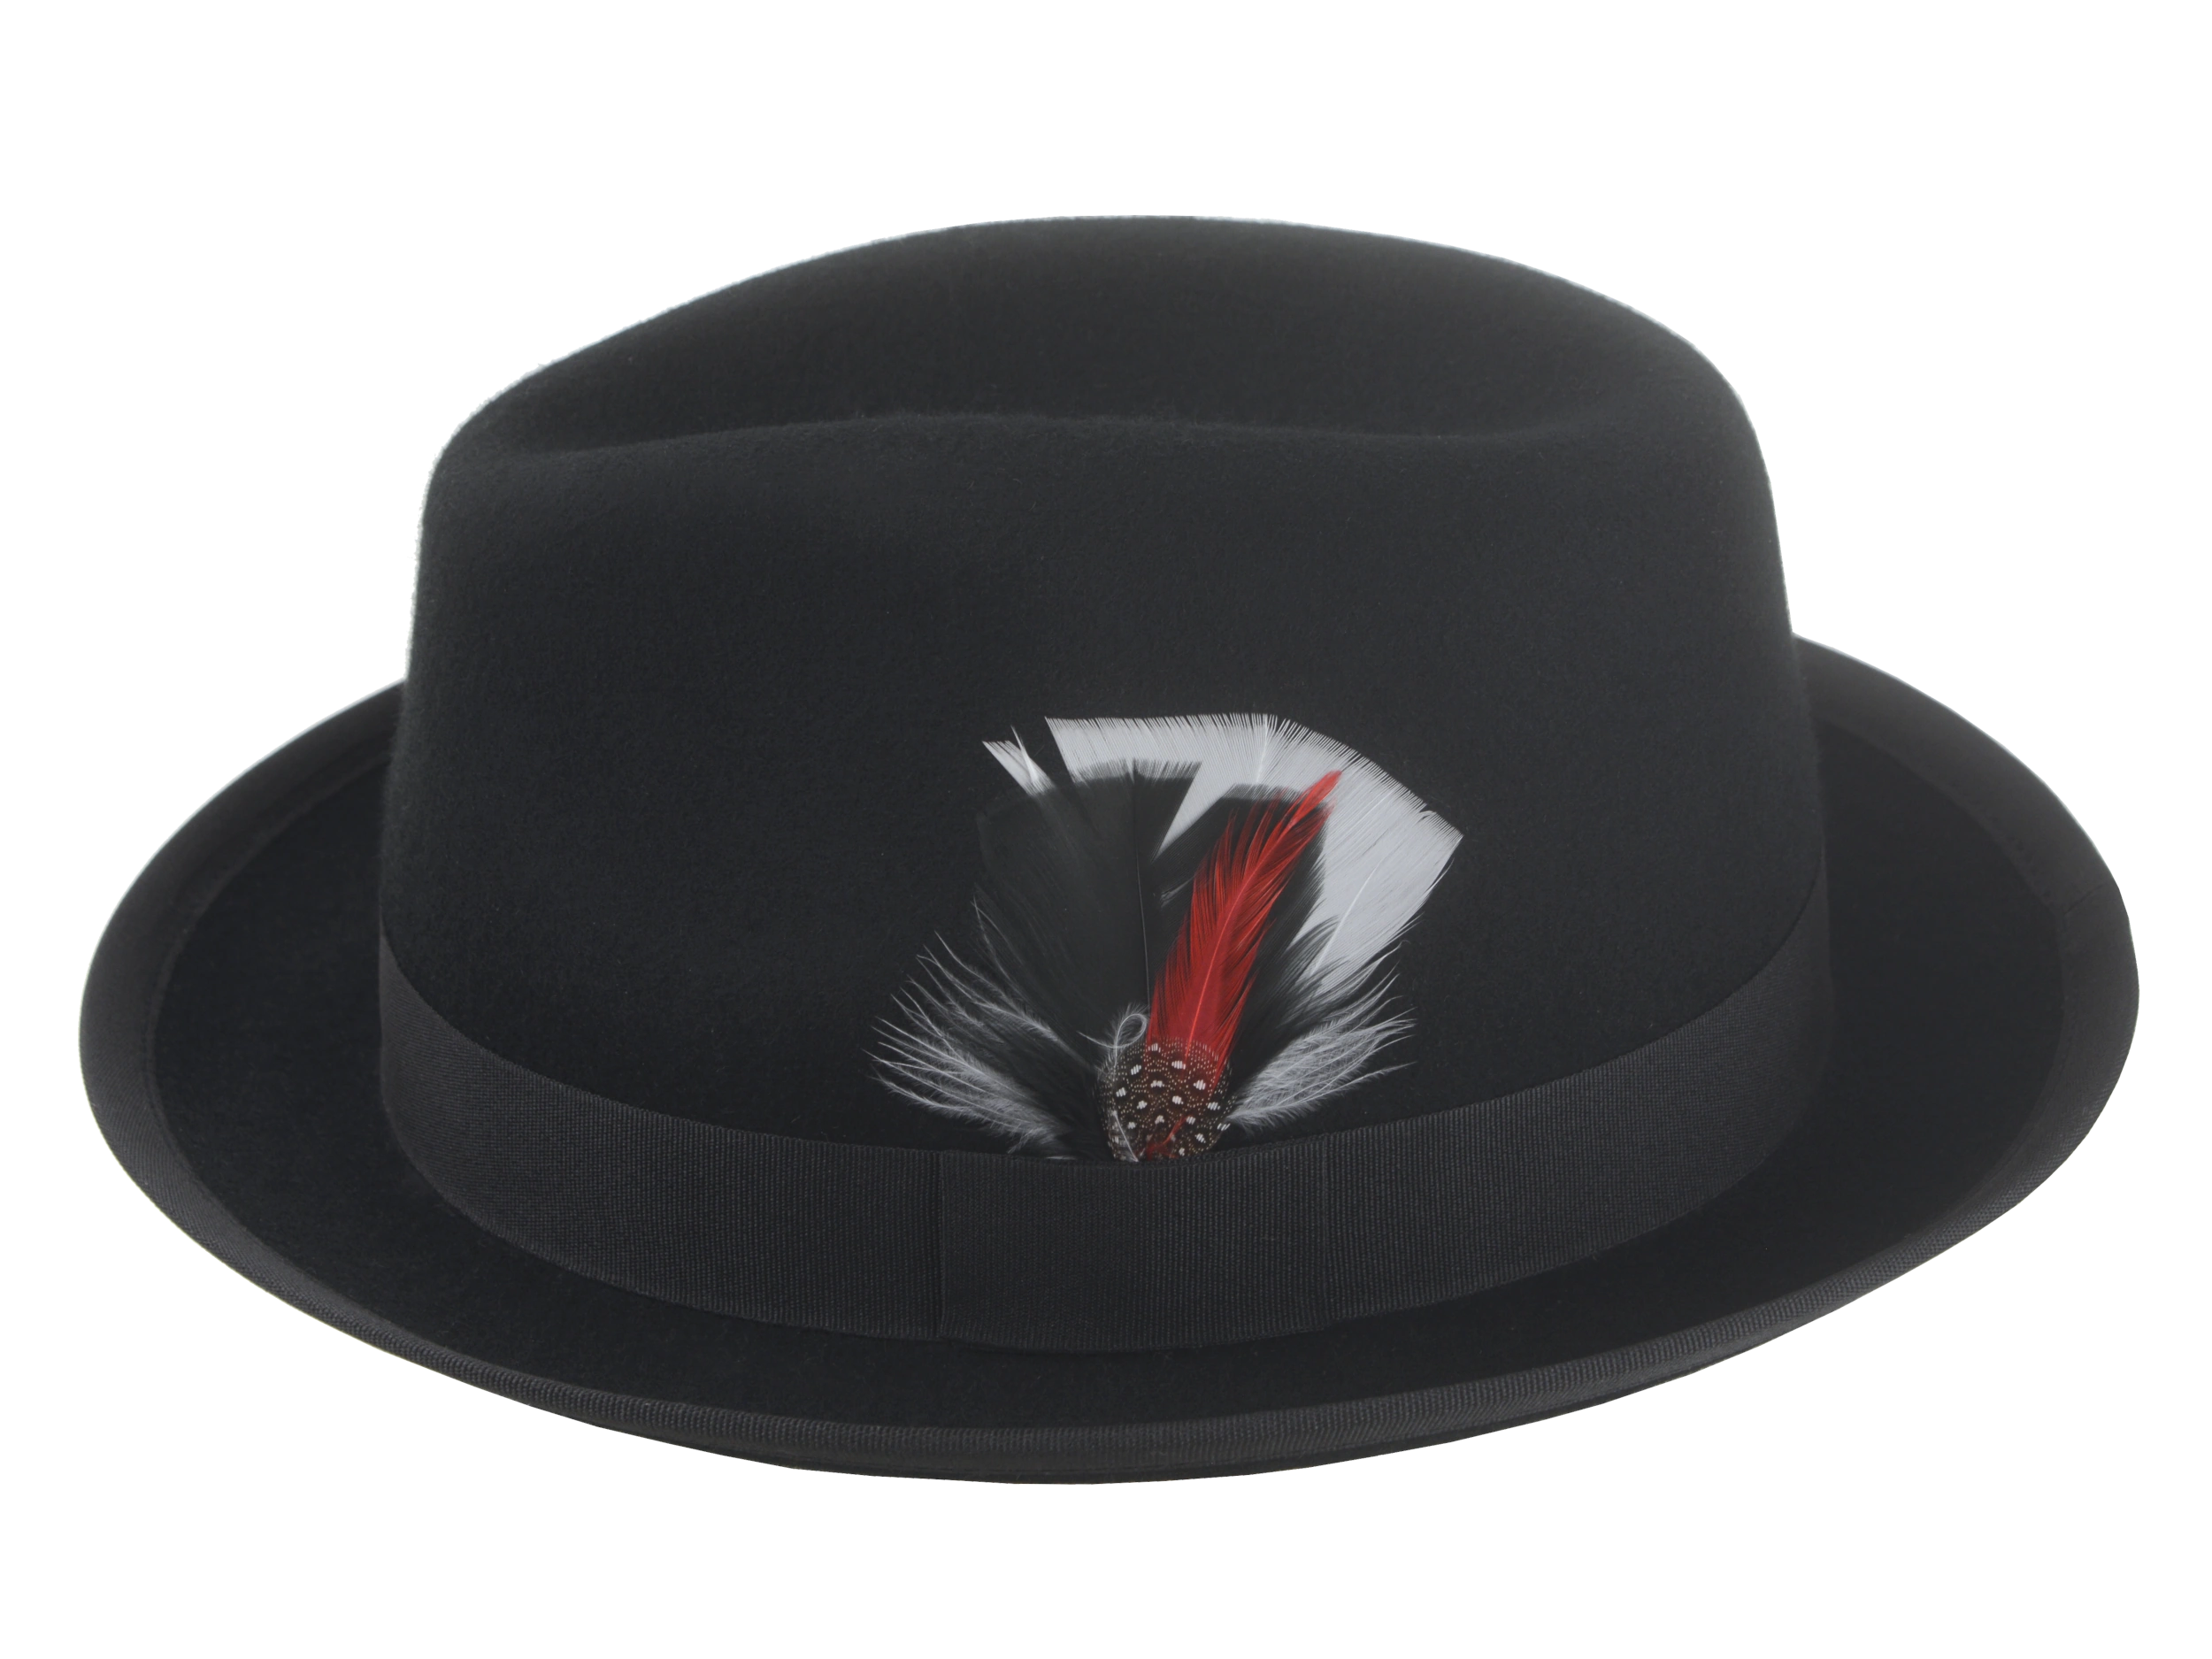 The Crab - Premium Wool Felt Trilby Fedora For Men or Women with Feather in Black White and Red Color | Agnoulita Quality Custom Hats 2